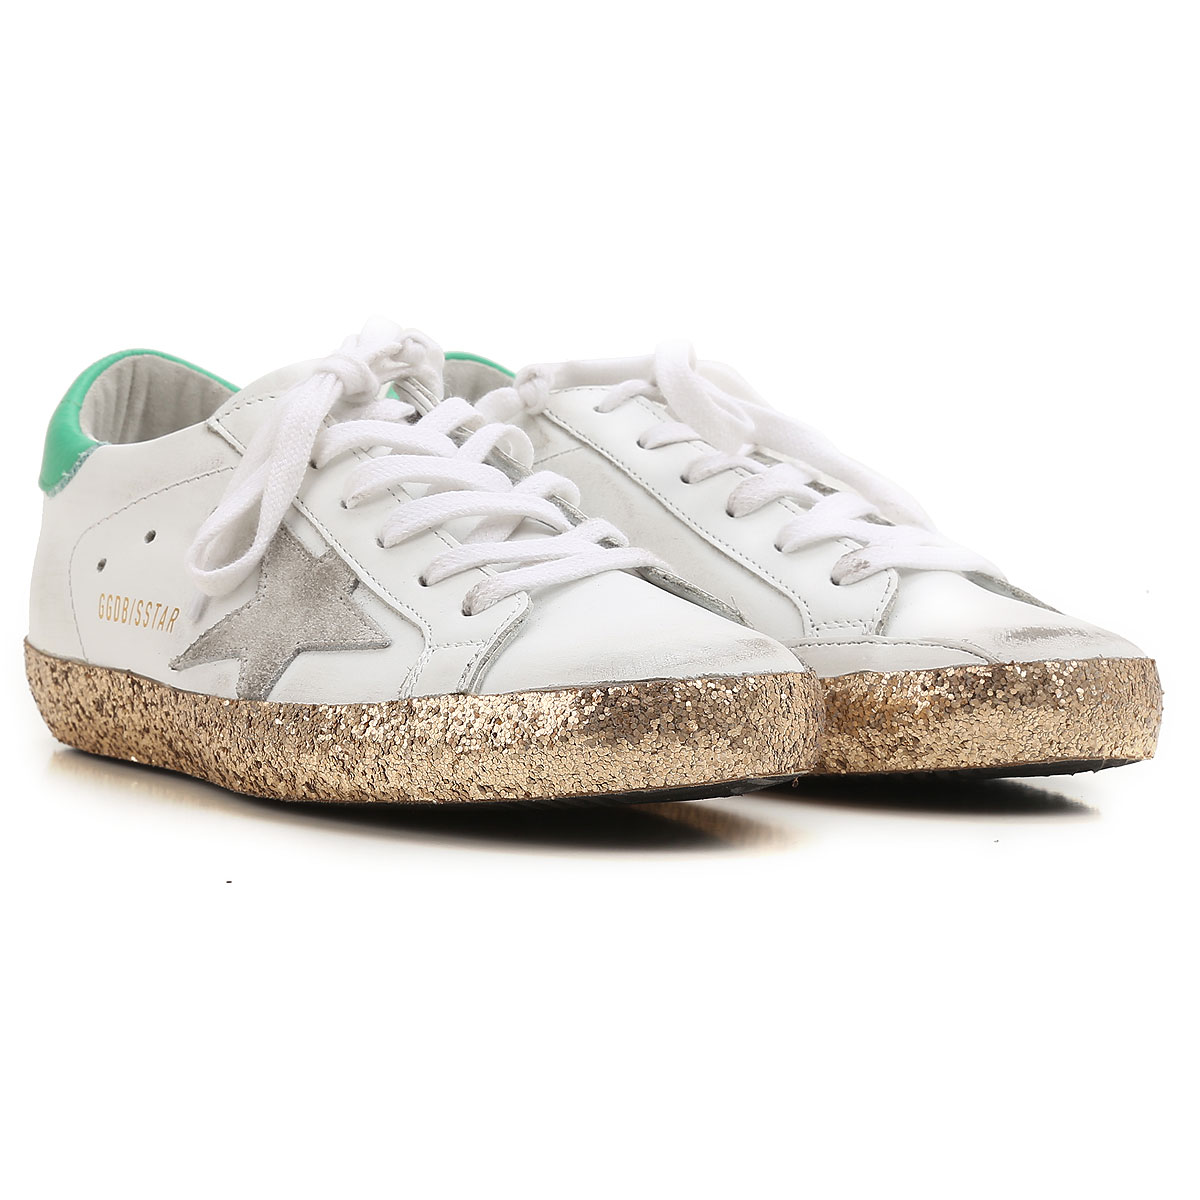 Womens Shoes Golden Goose, Style code: g31ws590-d53-